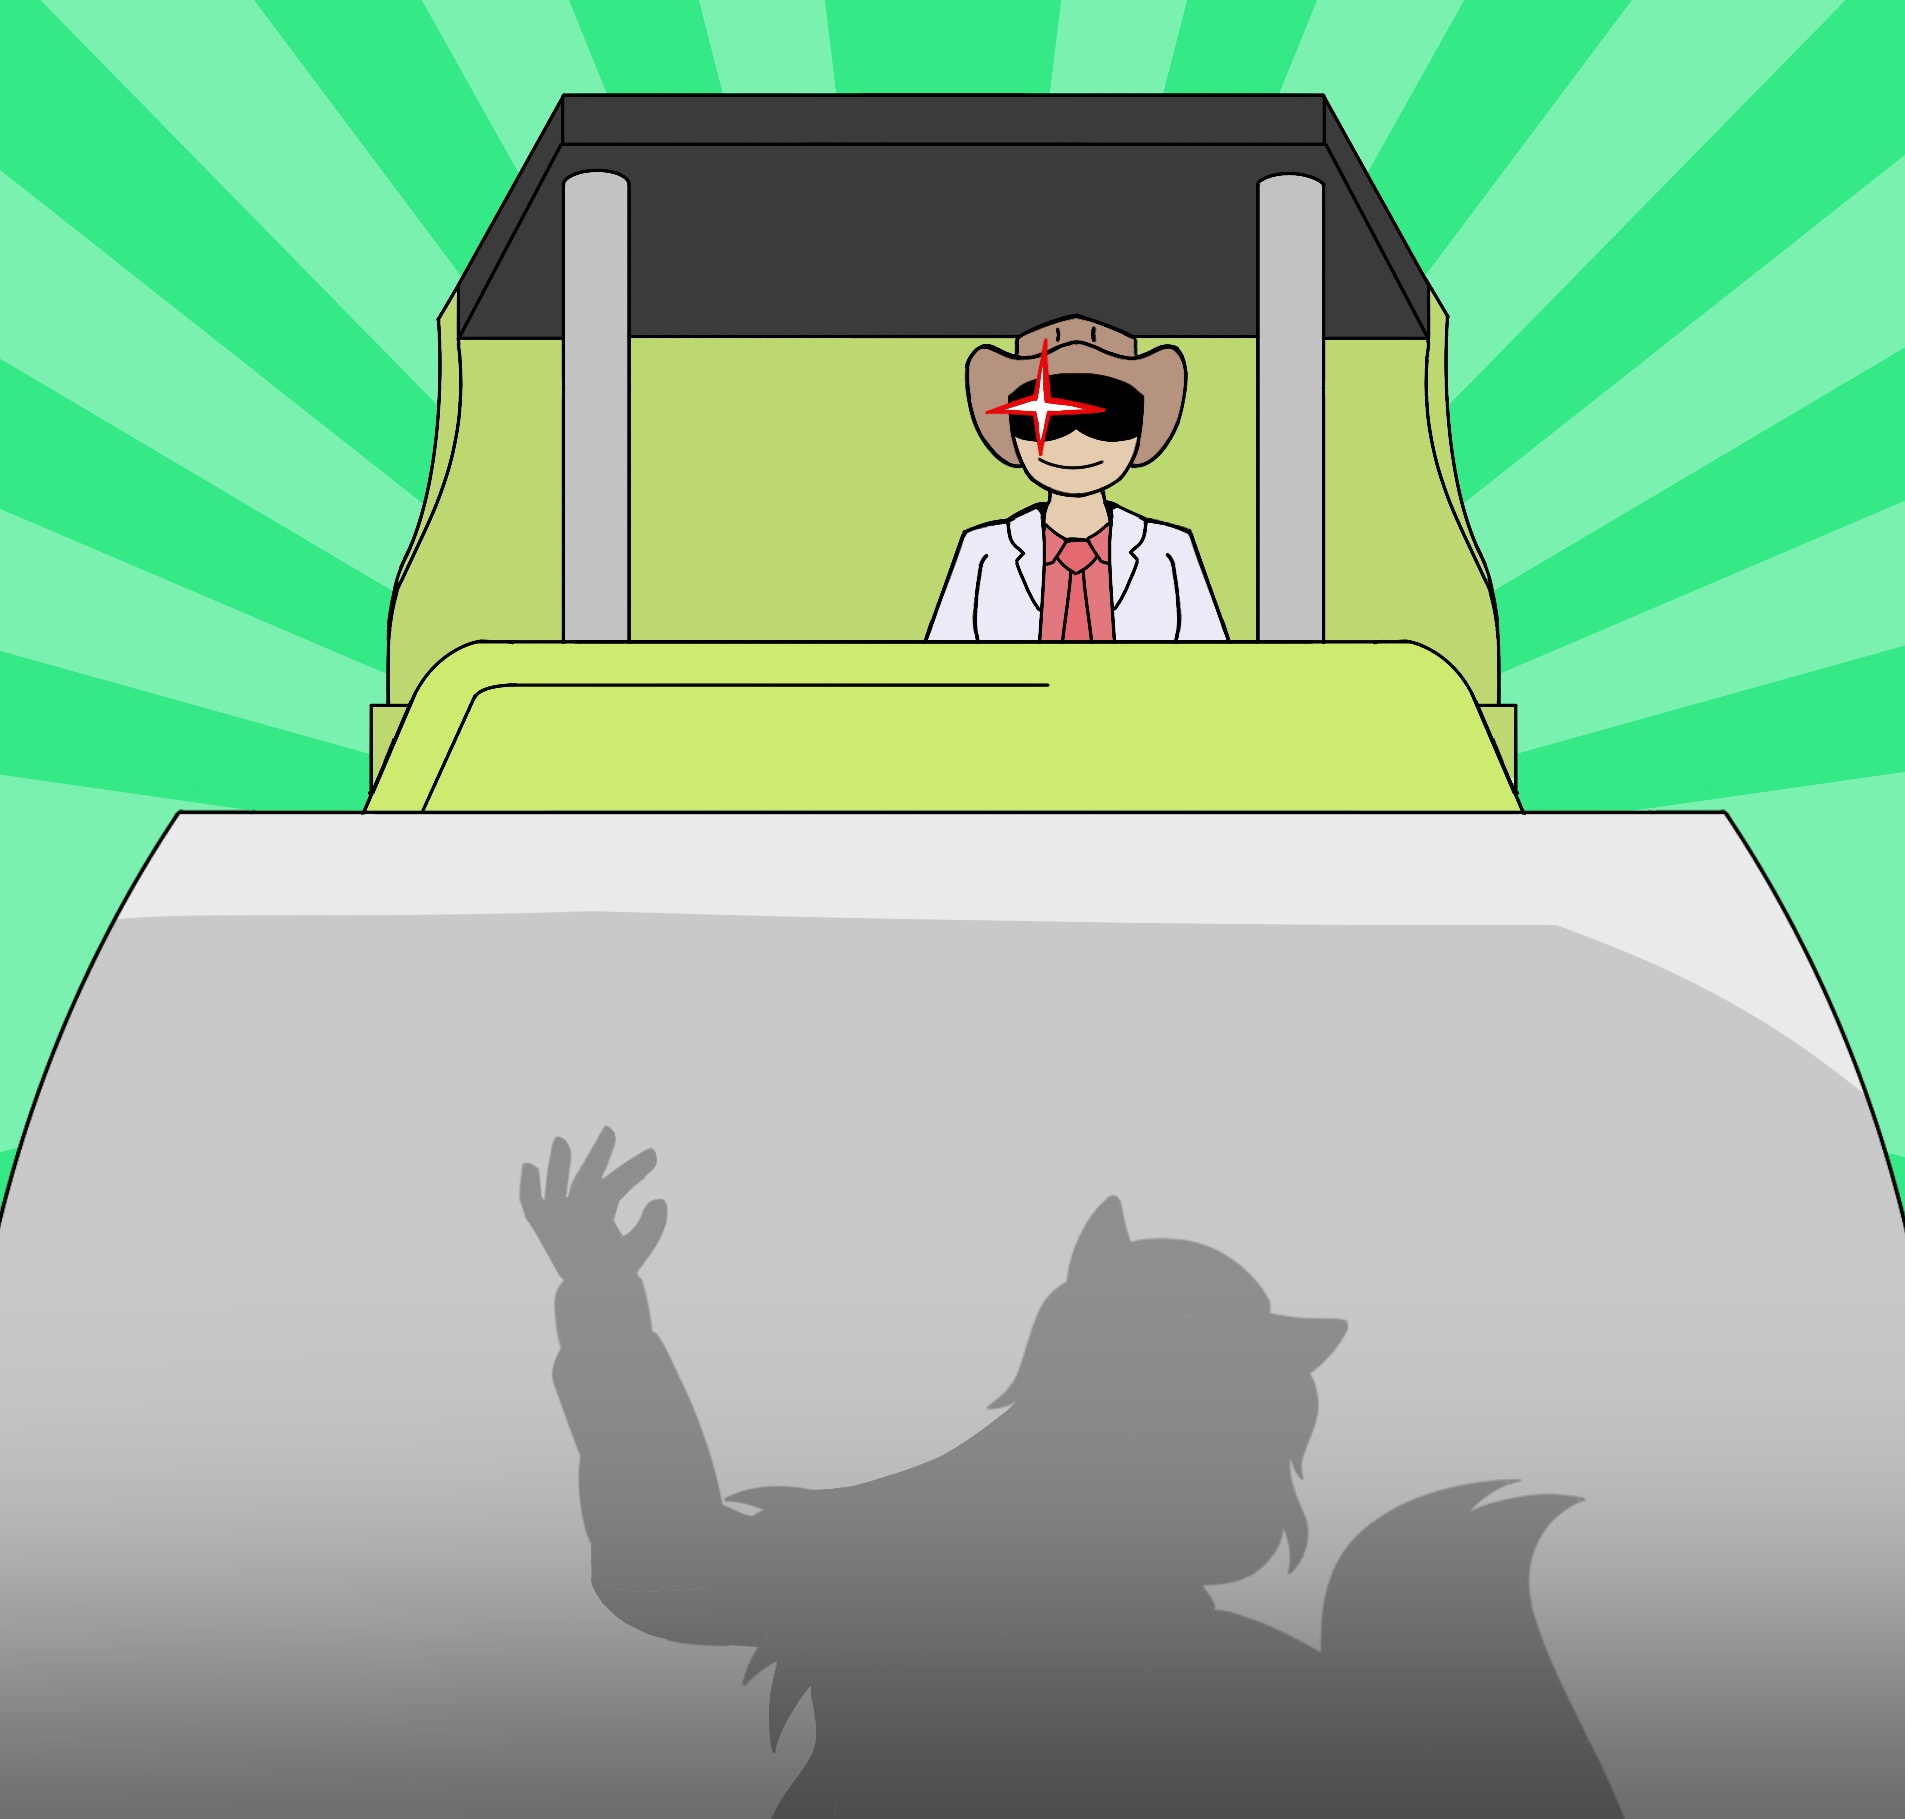 a shot from my fursona's POV, up at the steam roller. the driver's face is in shadow, with his left eye glaring red. you can see my shadow on the roller, still in fear as i'm about to be flattened